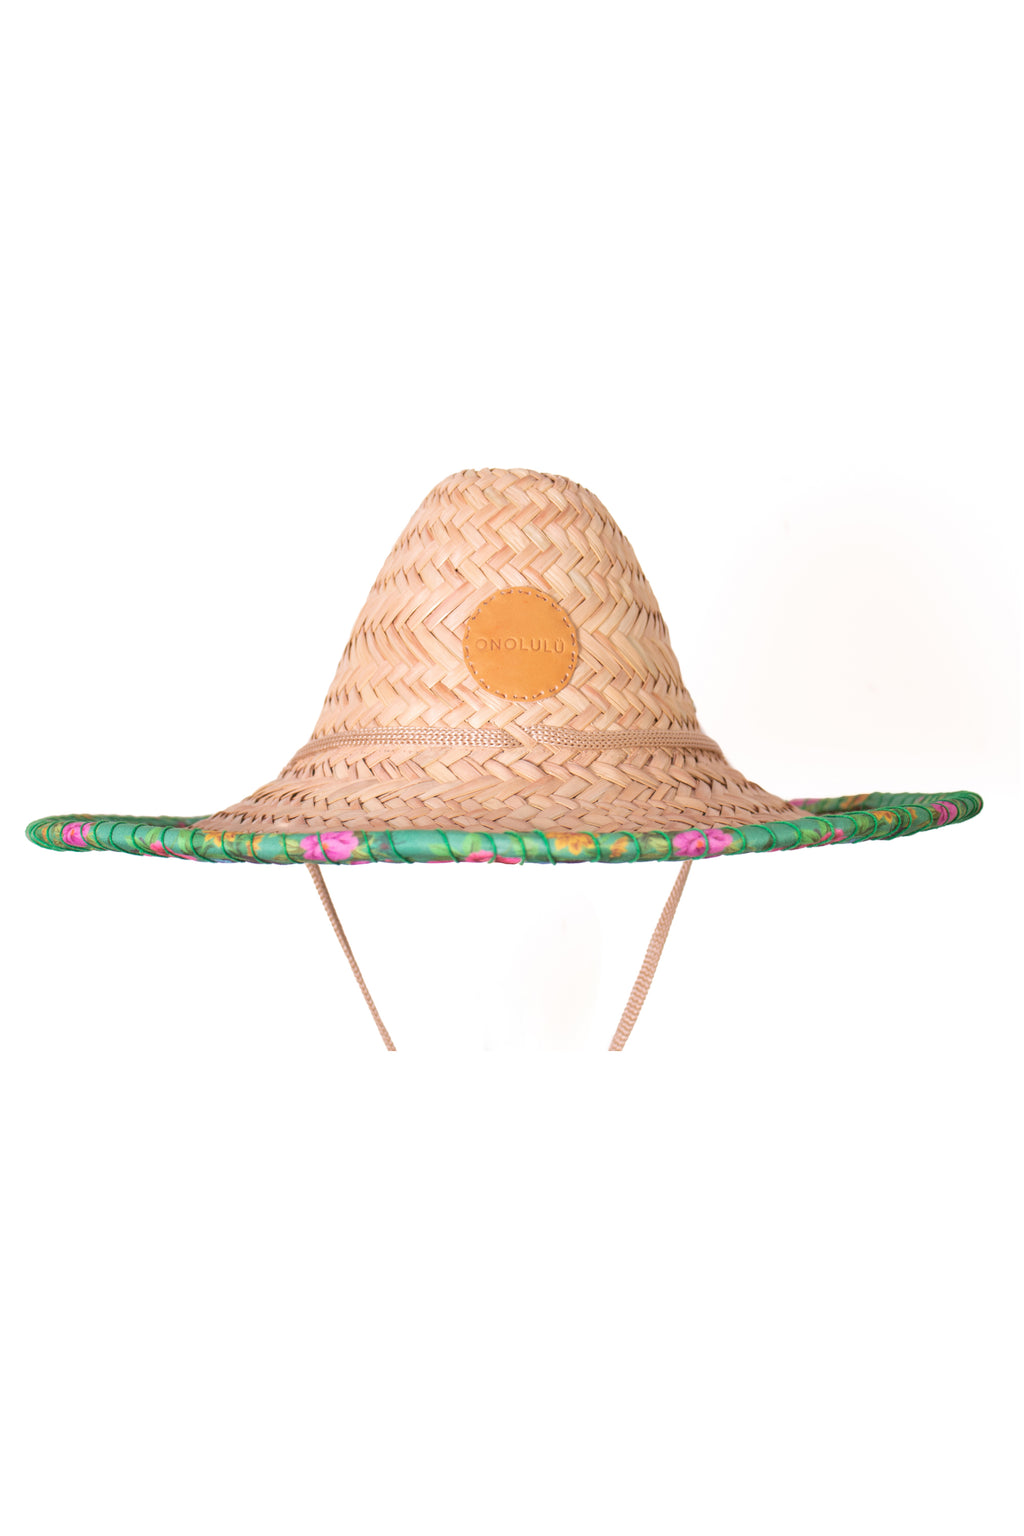 Hat-Onolulu-Rose-Collection-1